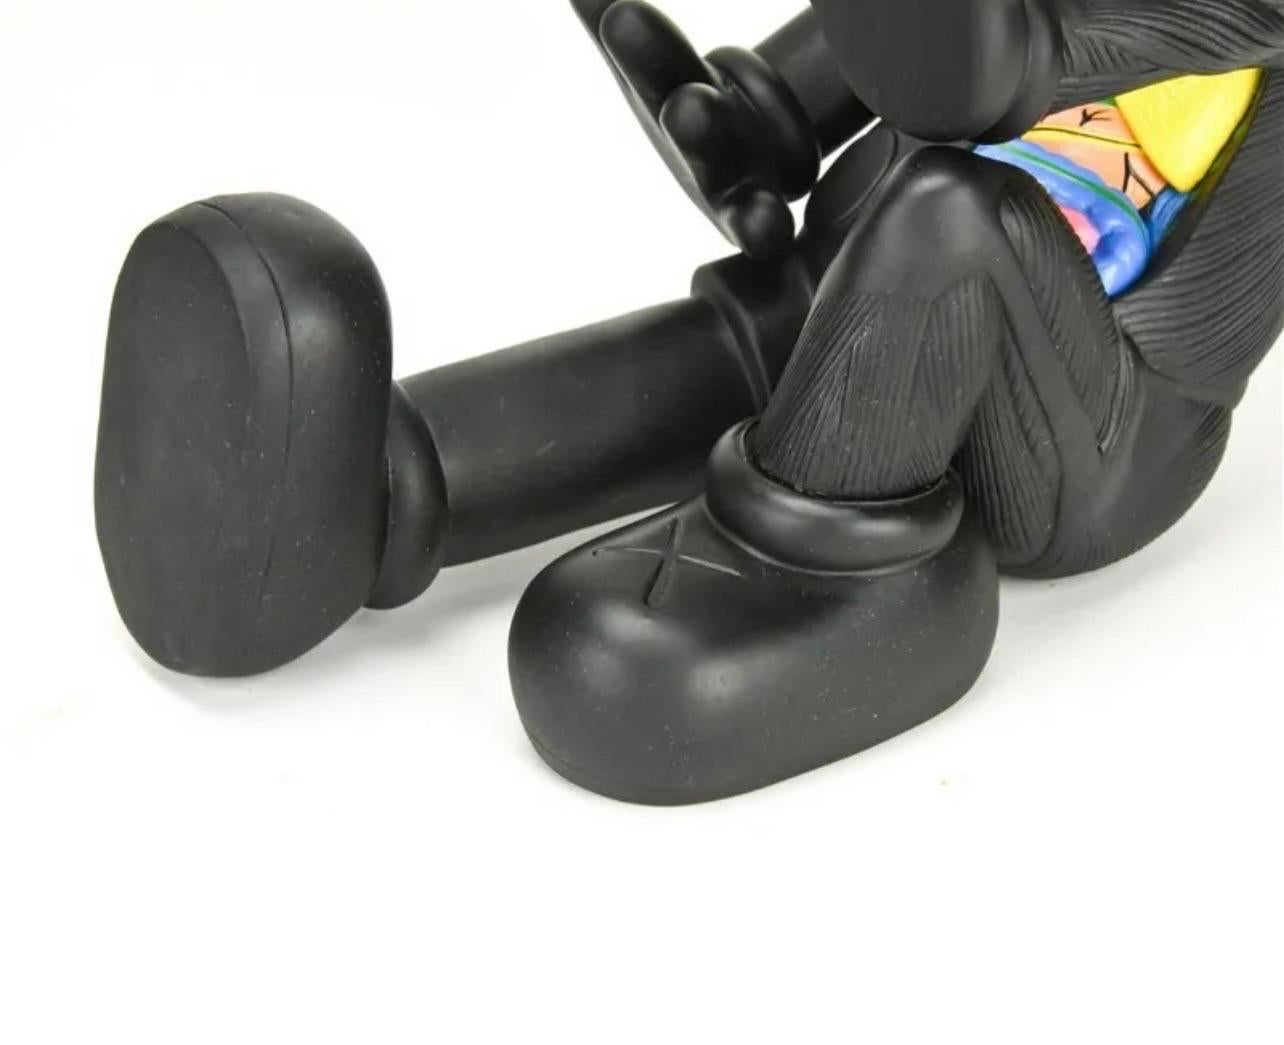 Painted Wonderful Modern Kaws Seated Black Dissected Flayed Companion 2013 Sculpture For Sale